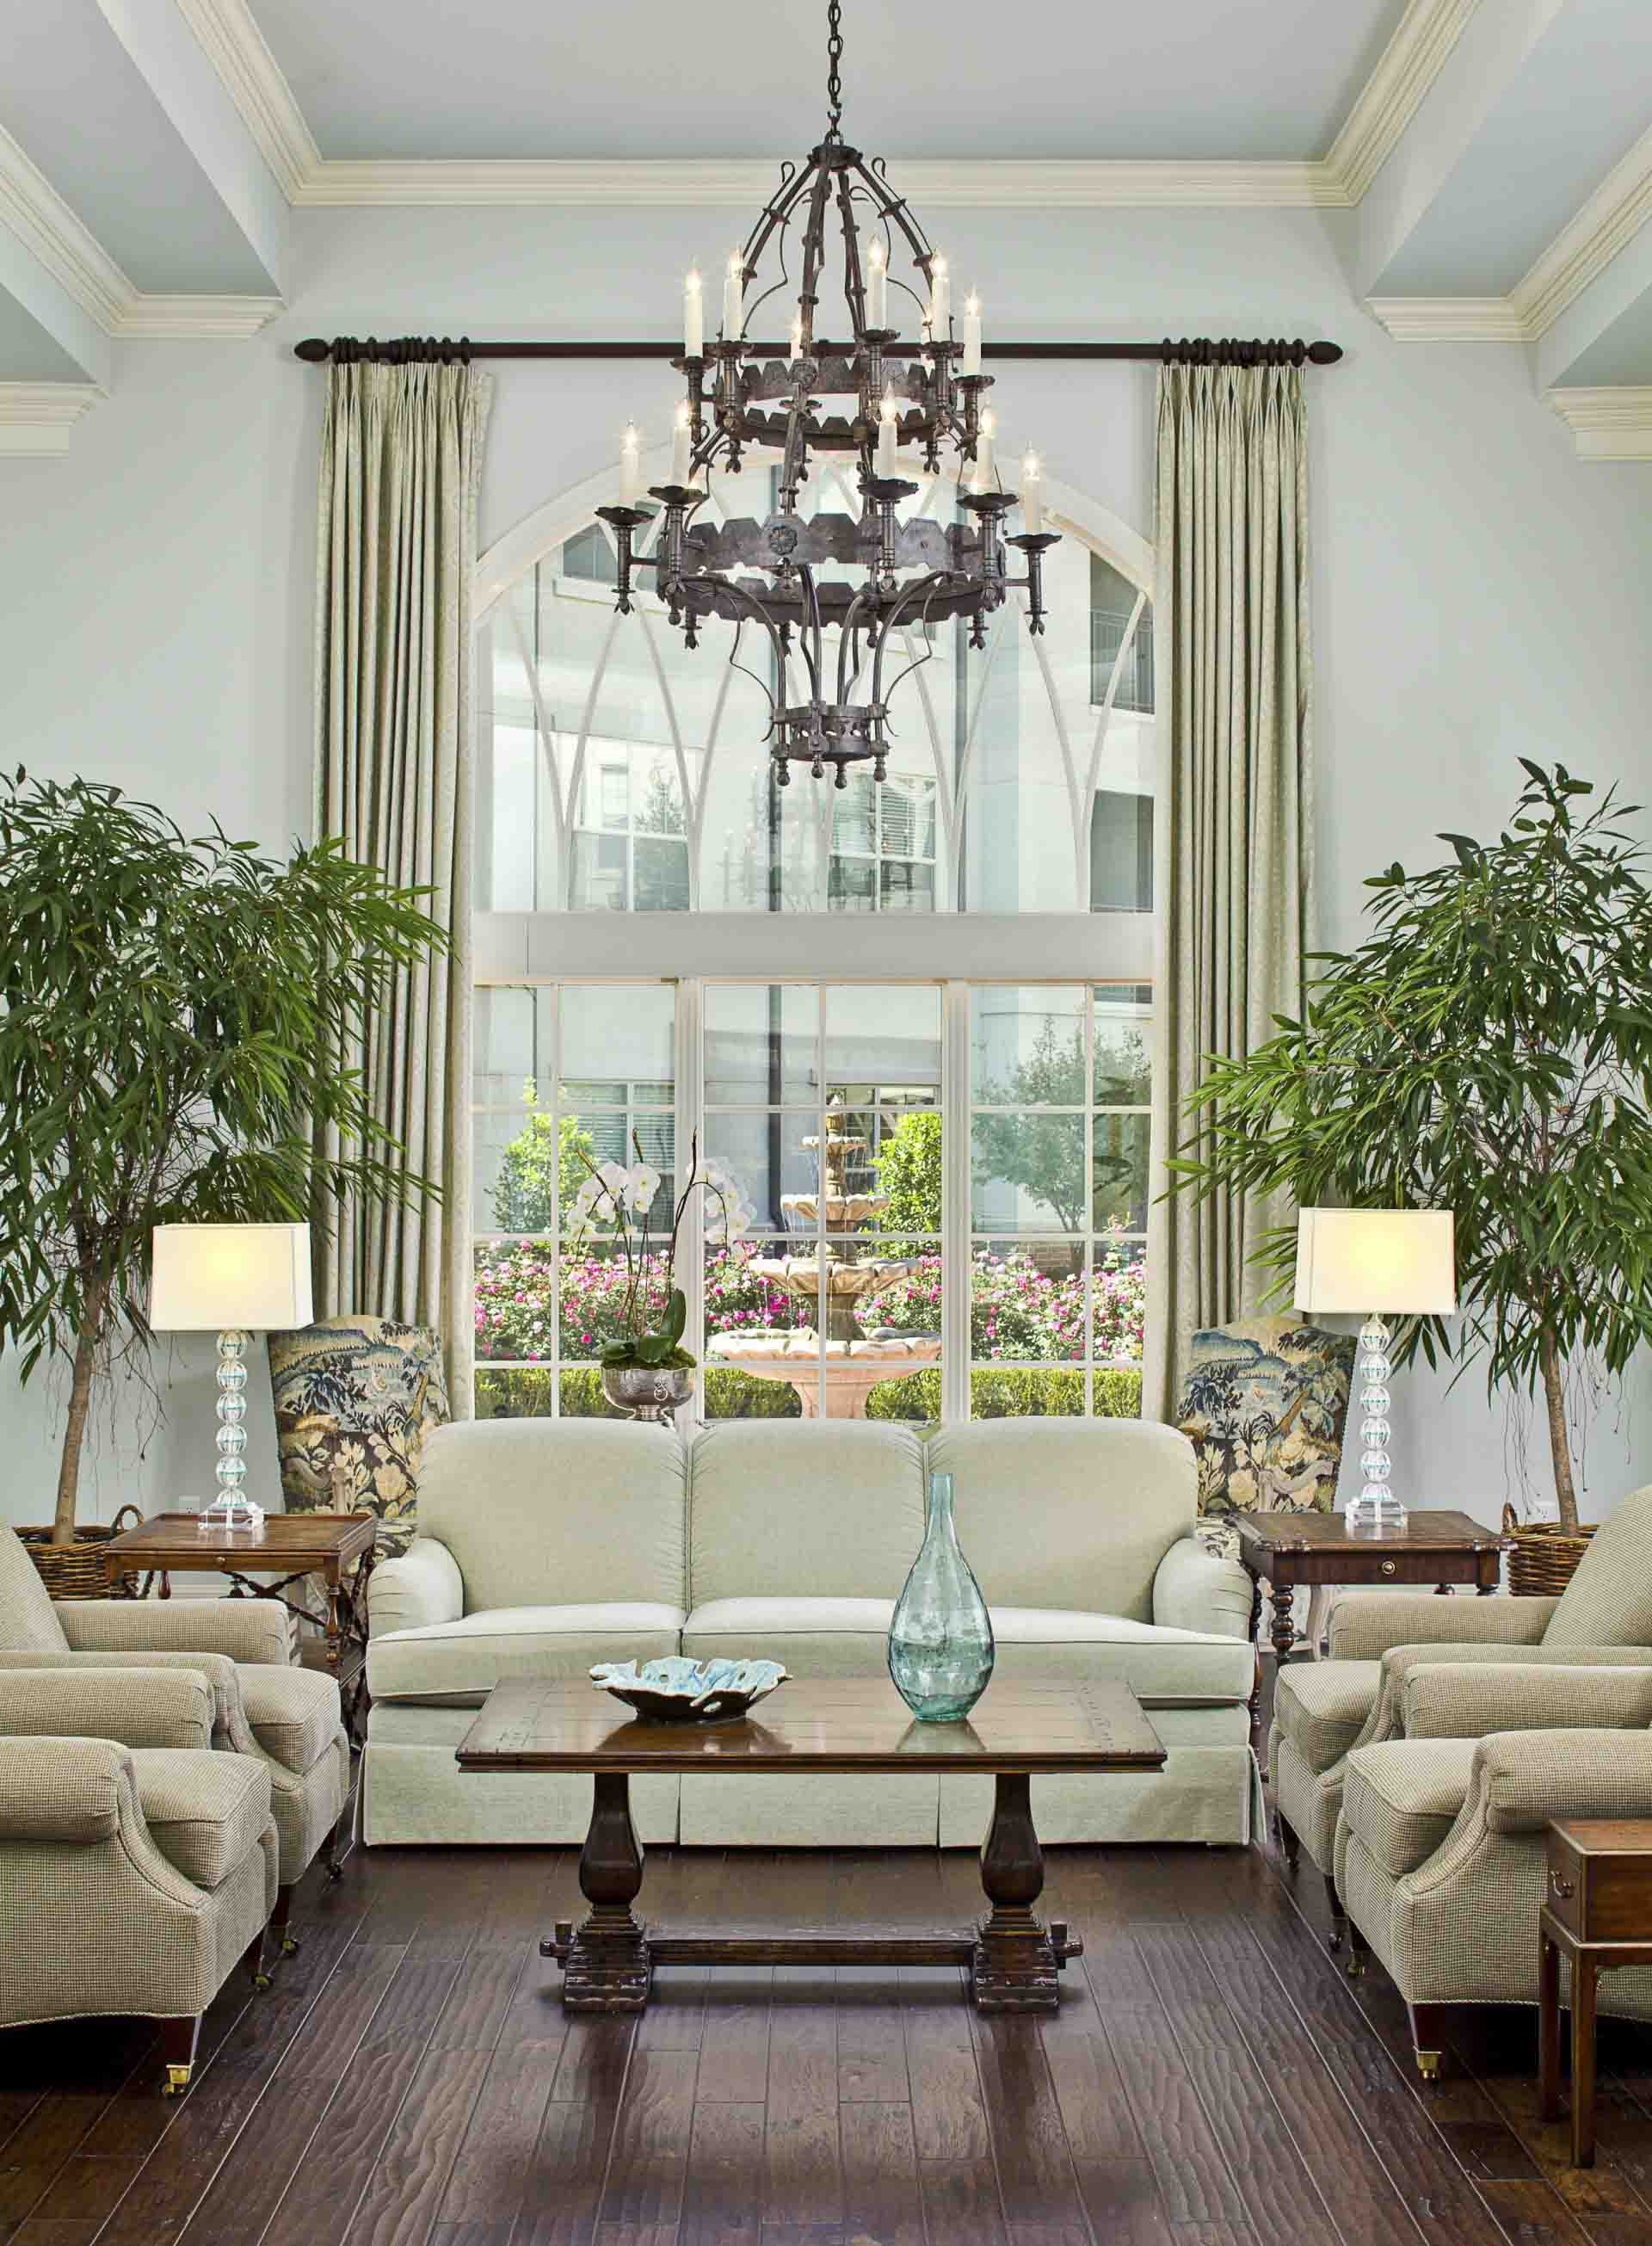 A sitting area with chandelier & large window overlooking a courtyard at Tradition Senior Living - Prestonwood in Dallas, TX.